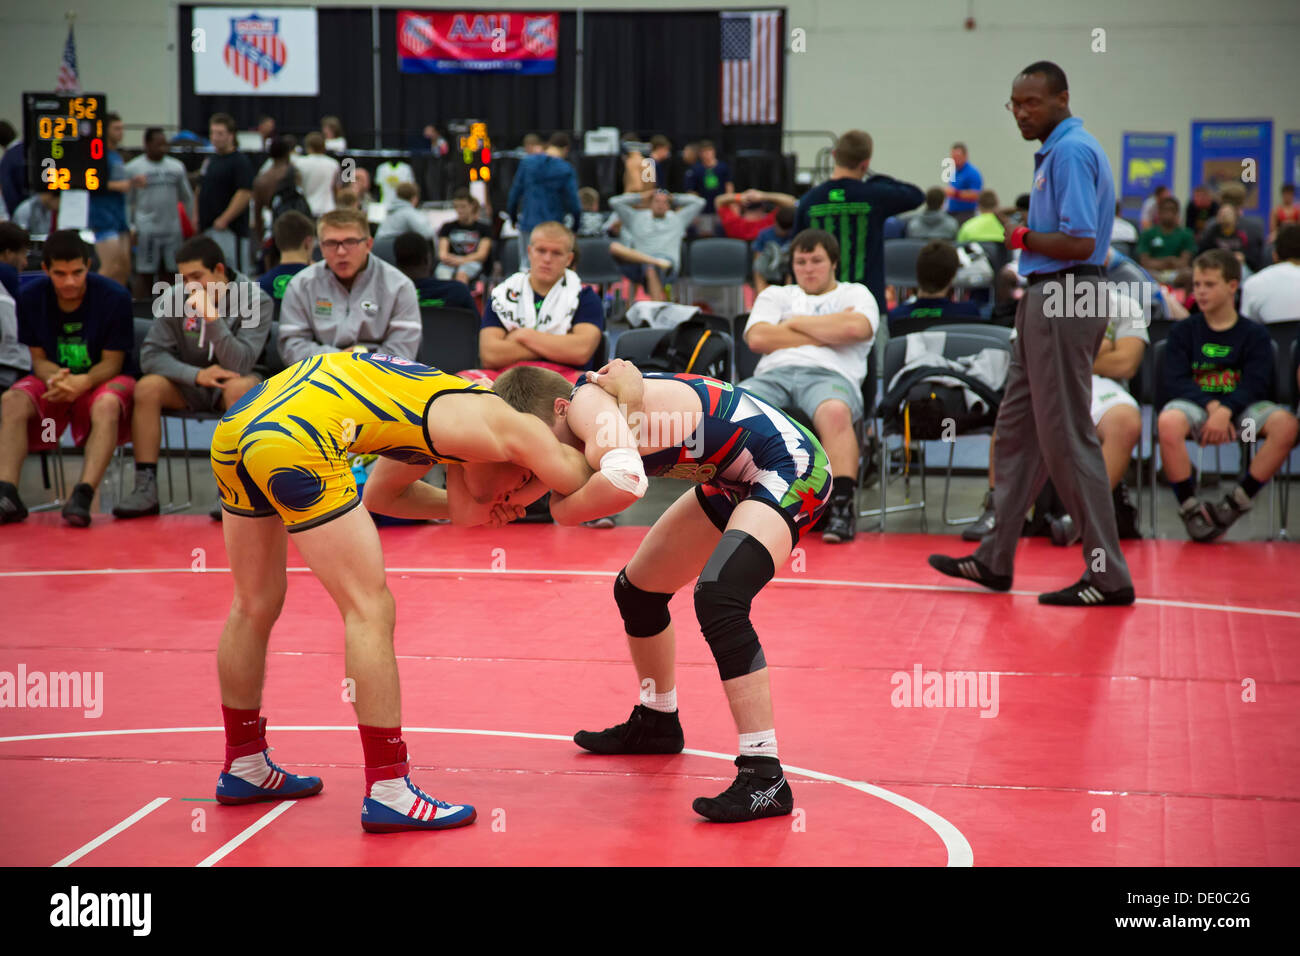 Detroit, Michigan - Wrestling competition at the AAU Junior Olympic Games. Stock Photo